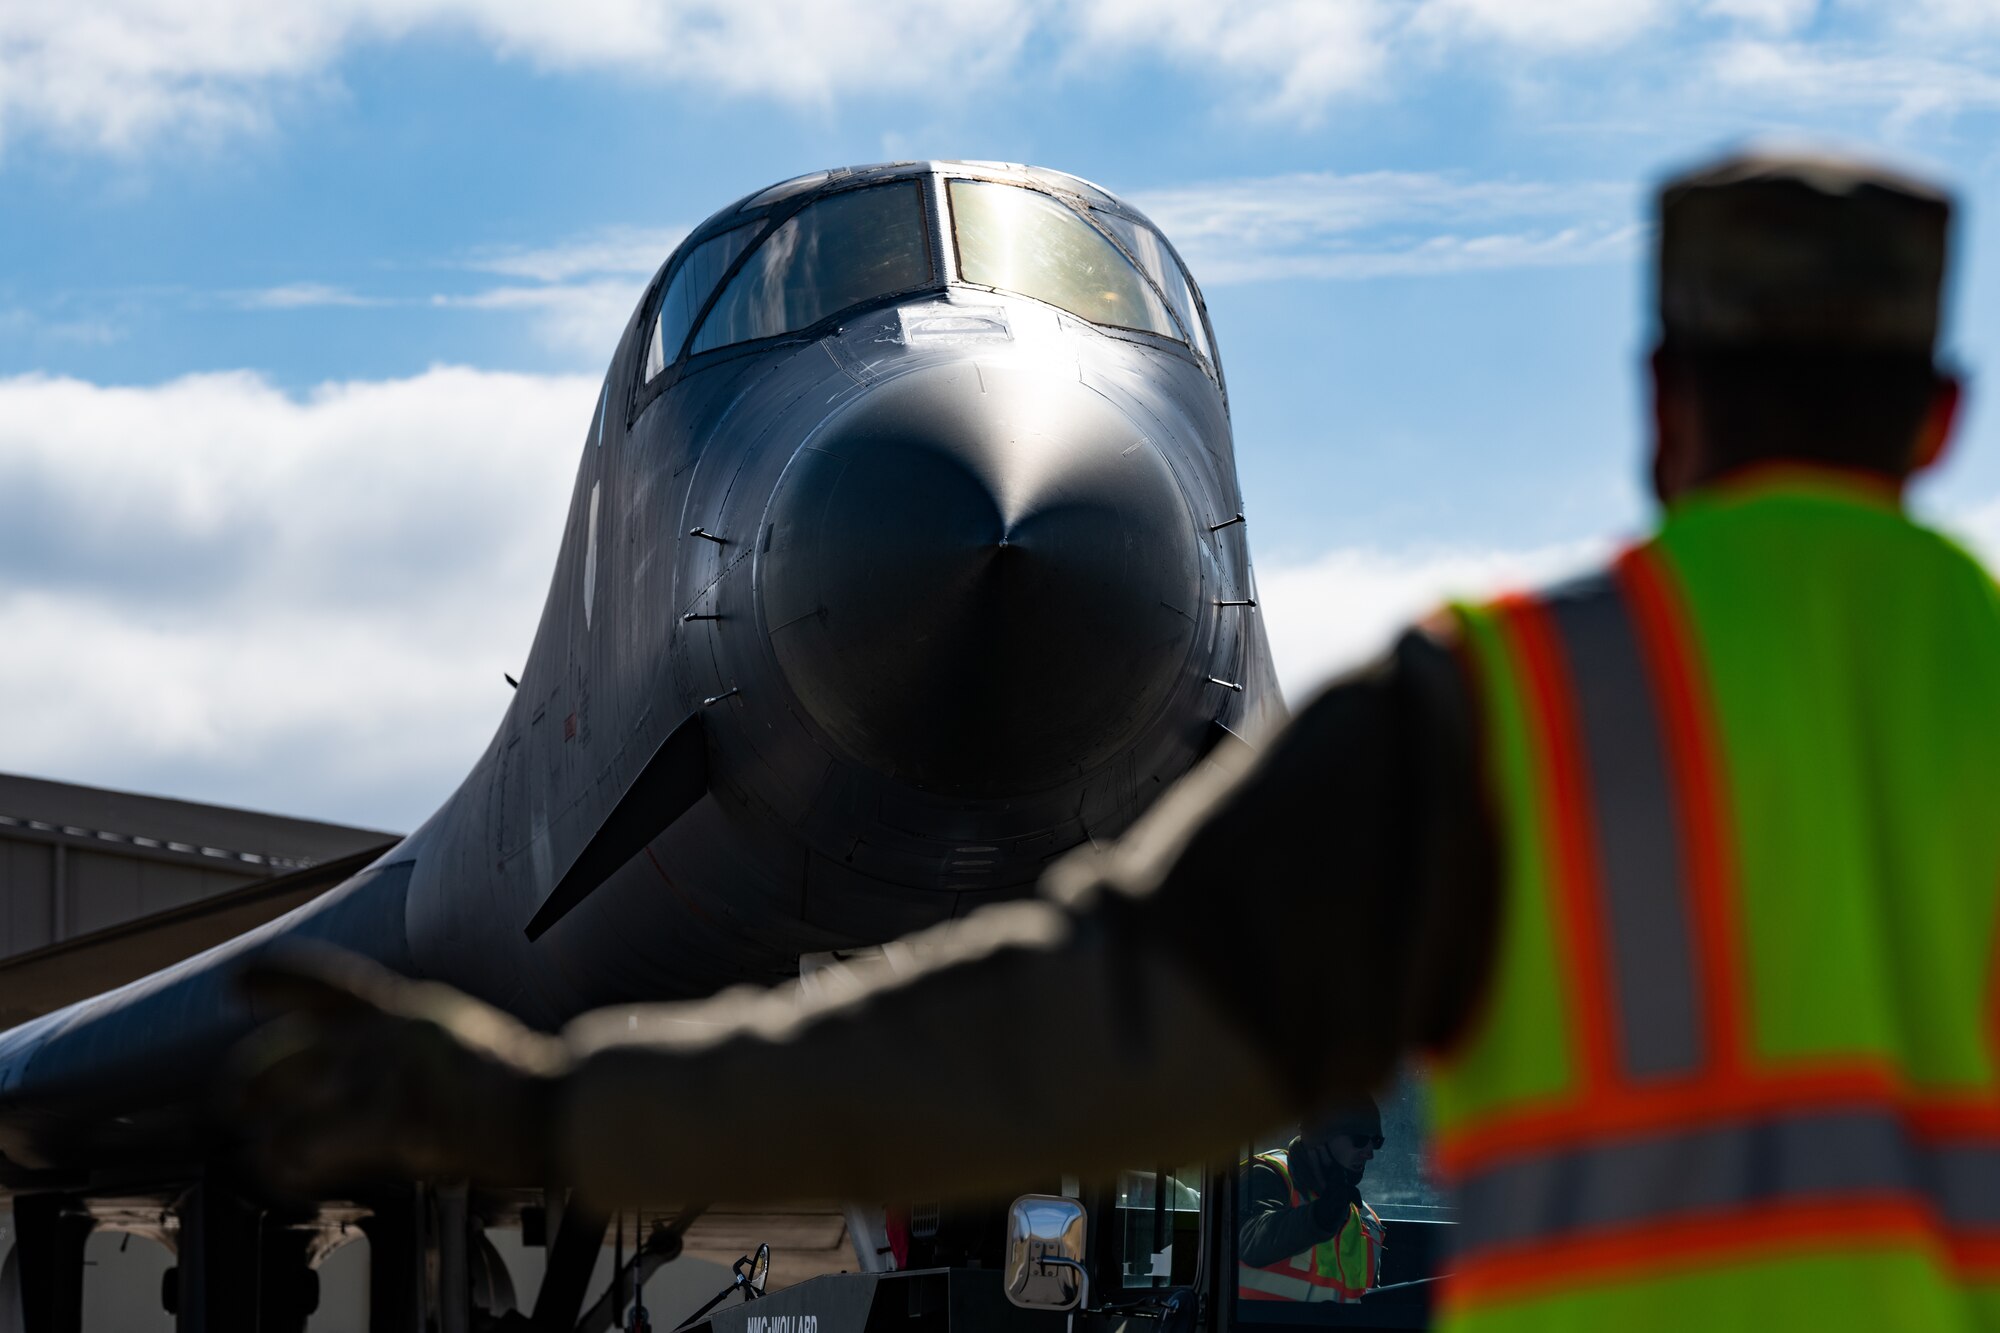 The B-1B Lancer has remained an iconic symbol of American airpower for nearly 40 years with the first production B-1 taking flight in 1984.